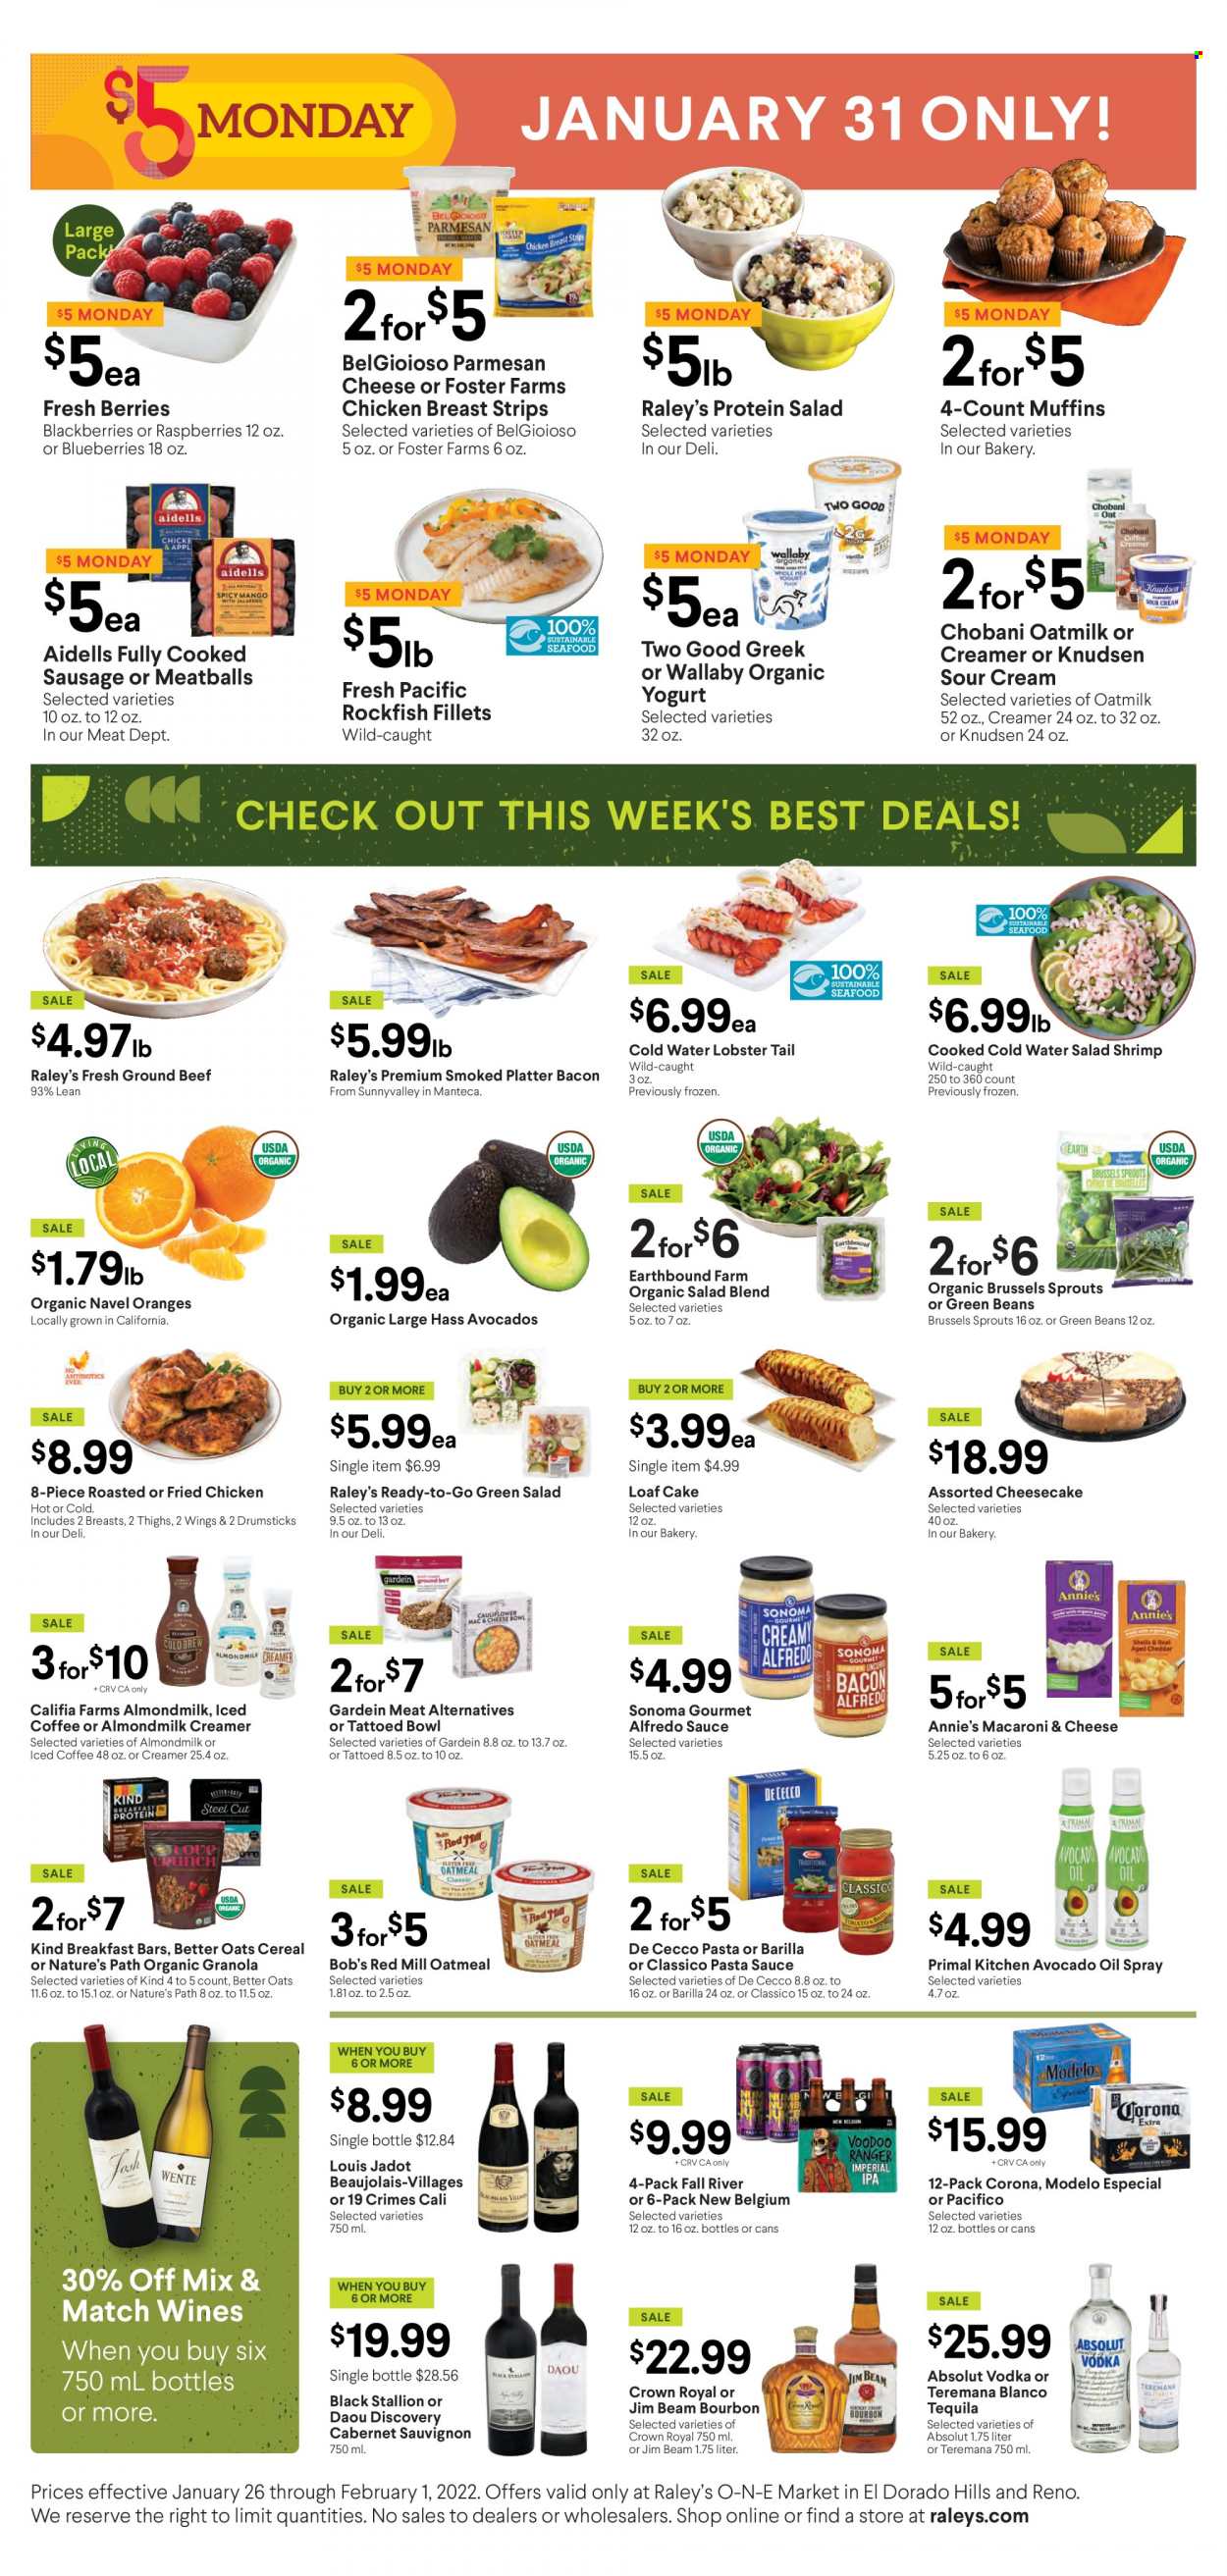 thumbnail - Raley's Flyer - 01/26/2022 - 02/01/2022 - Sales products - cake, cheesecake, muffin, loaf cake, green beans, brussel sprouts, blackberries, blueberries, oranges, lobster, rockfish, lobster tail, shrimps, macaroni & cheese, pasta sauce, meatballs, sauce, fried chicken, Barilla, Alfredo sauce, Annie's, bacon, sausage, parmesan, yoghurt, organic yoghurt, Chobani, almond milk, oat milk, sour cream, creamer, strips, oatmeal, cereals, granola, Classico, avocado oil, oil, iced coffee, Cabernet Sauvignon, bourbon, tequila, vodka, Absolut, Jim Beam, beer, Corona Extra, Modelo, beef meat, ground beef, navel oranges. Page 2.